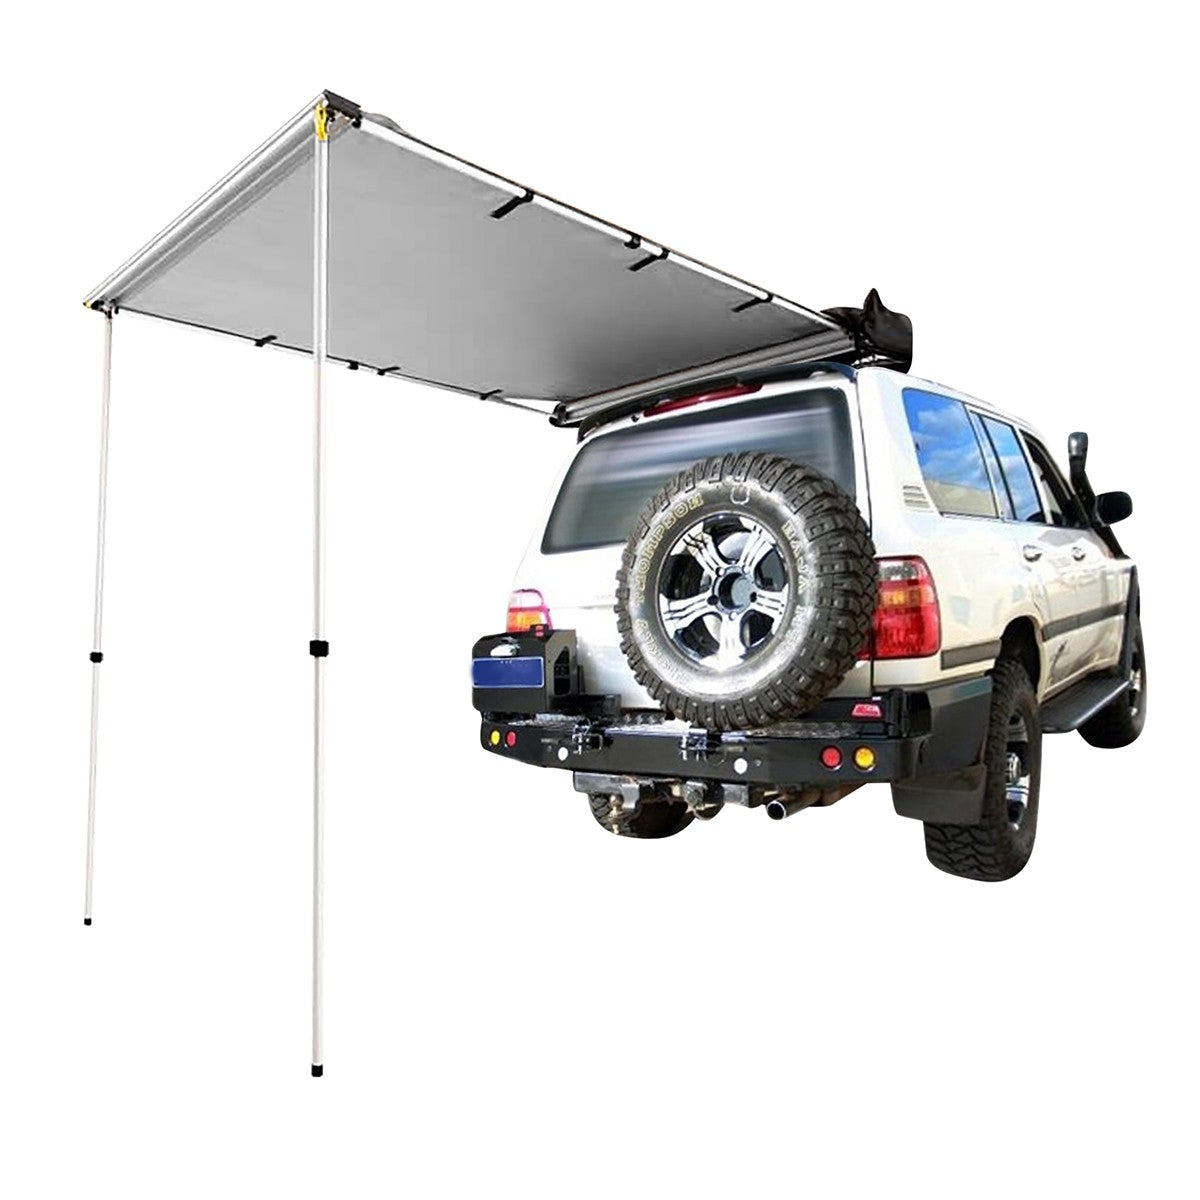 FRONTIER 140 DLX 4WD REAR AWNING